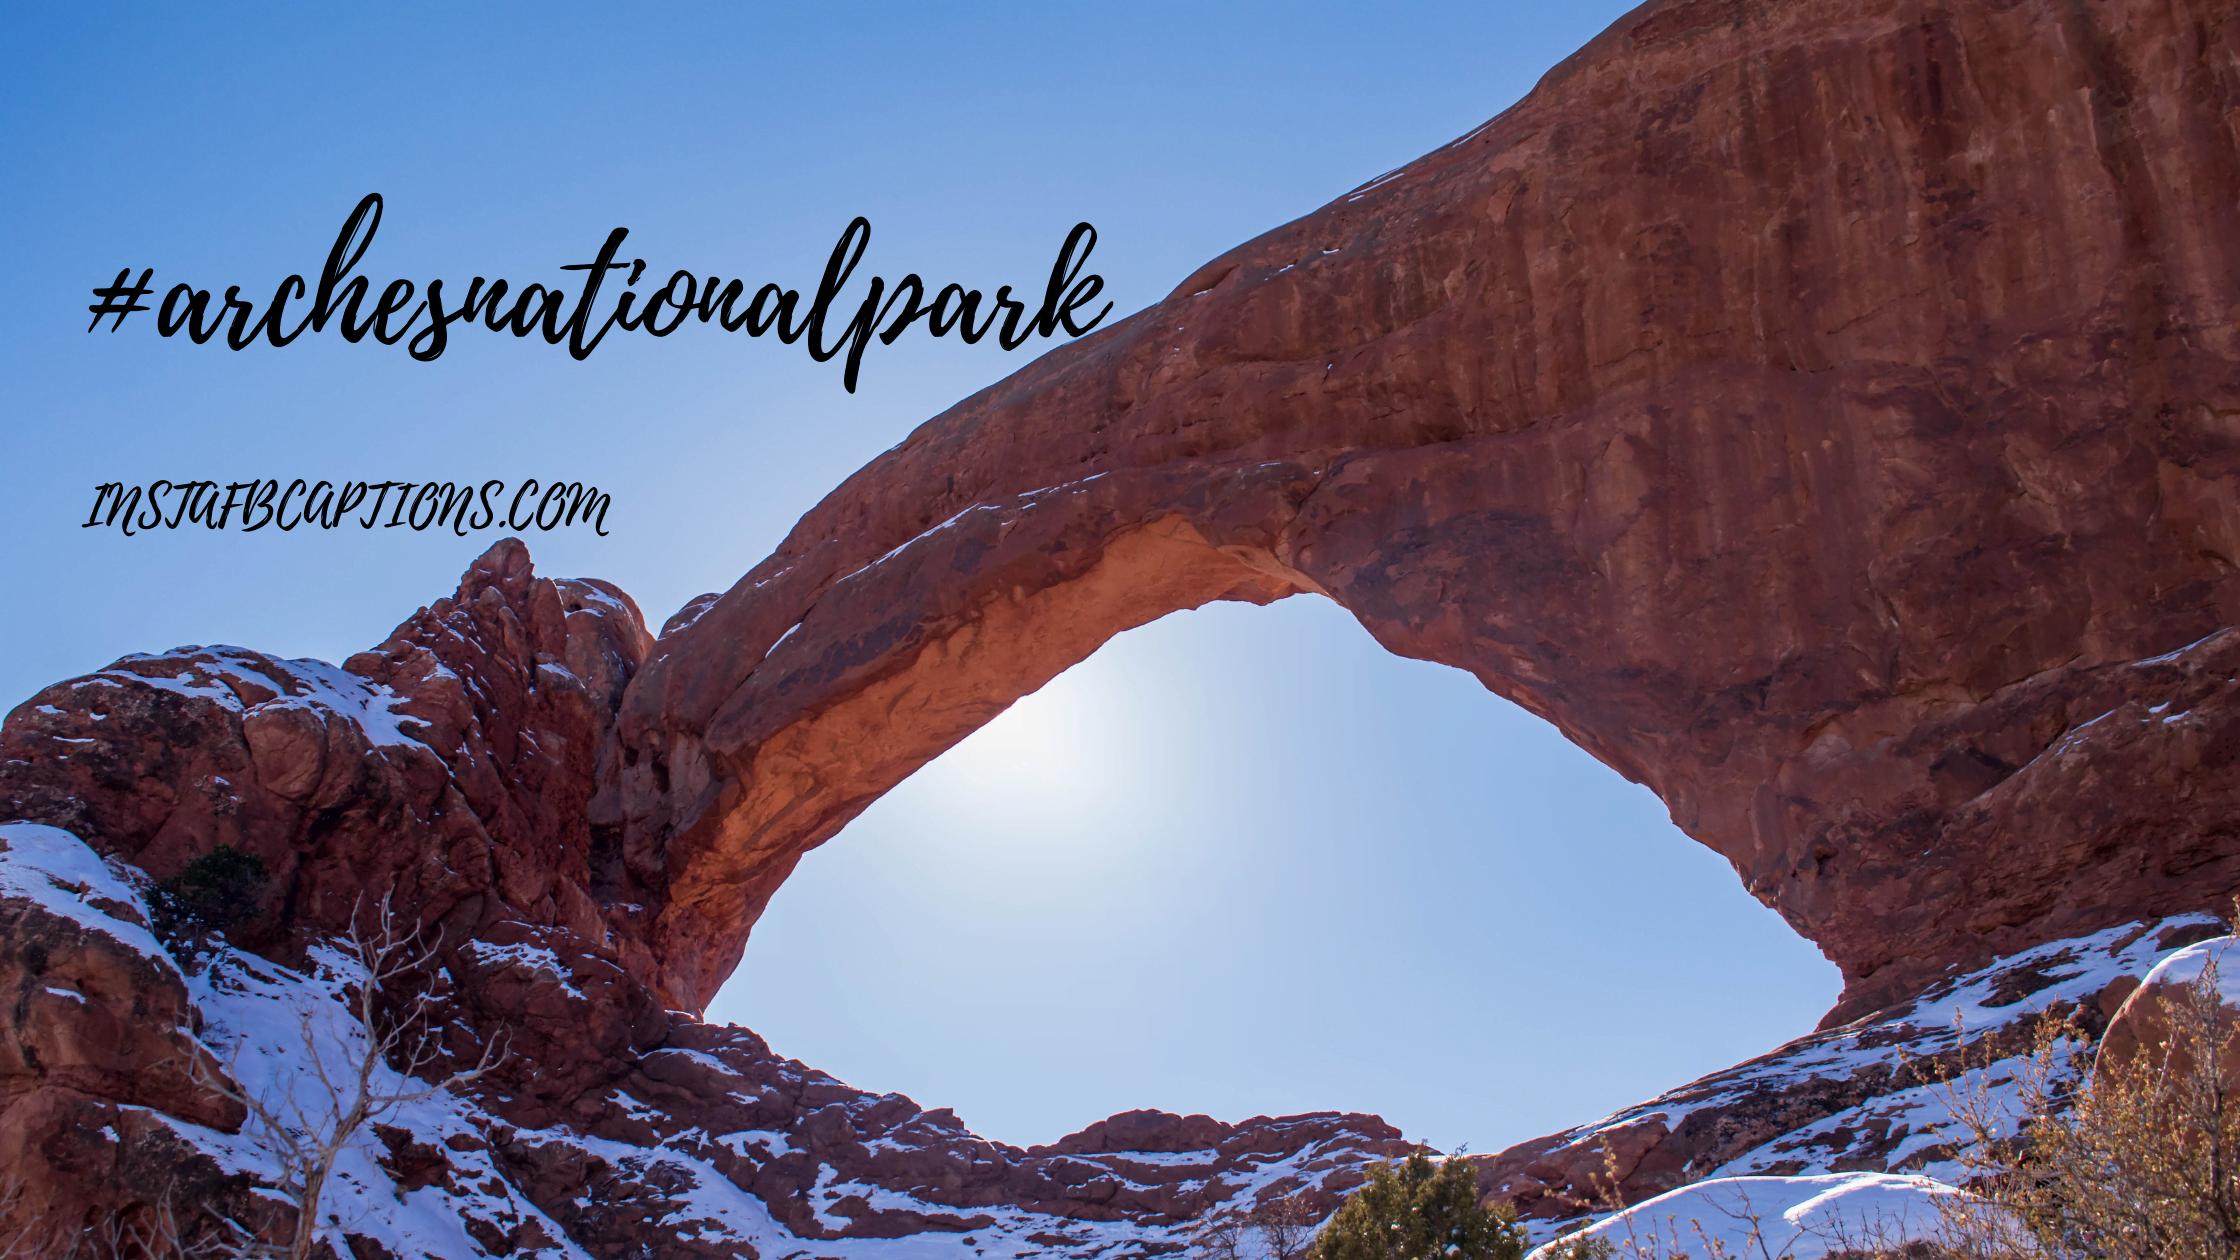 Arches National Park Hashtags  - Arches National Park Hashtags  - 97 Arches National Park Instagram Captions 2023